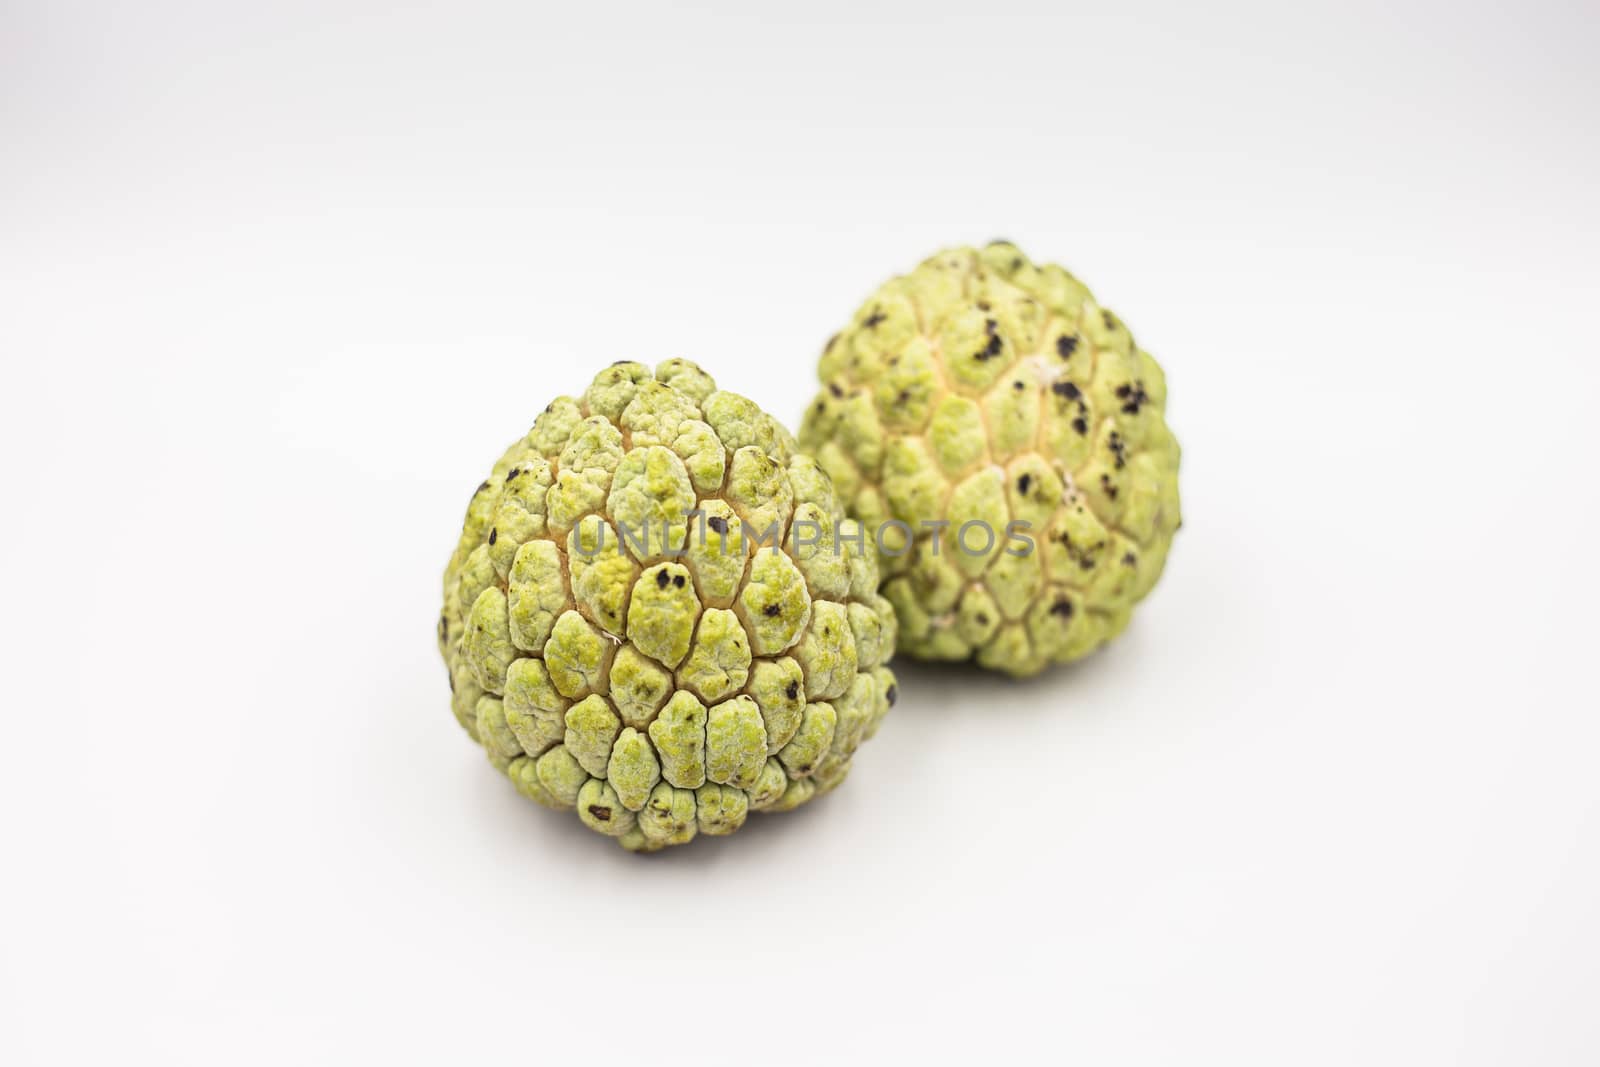 Two custard apples placed on a white ground.